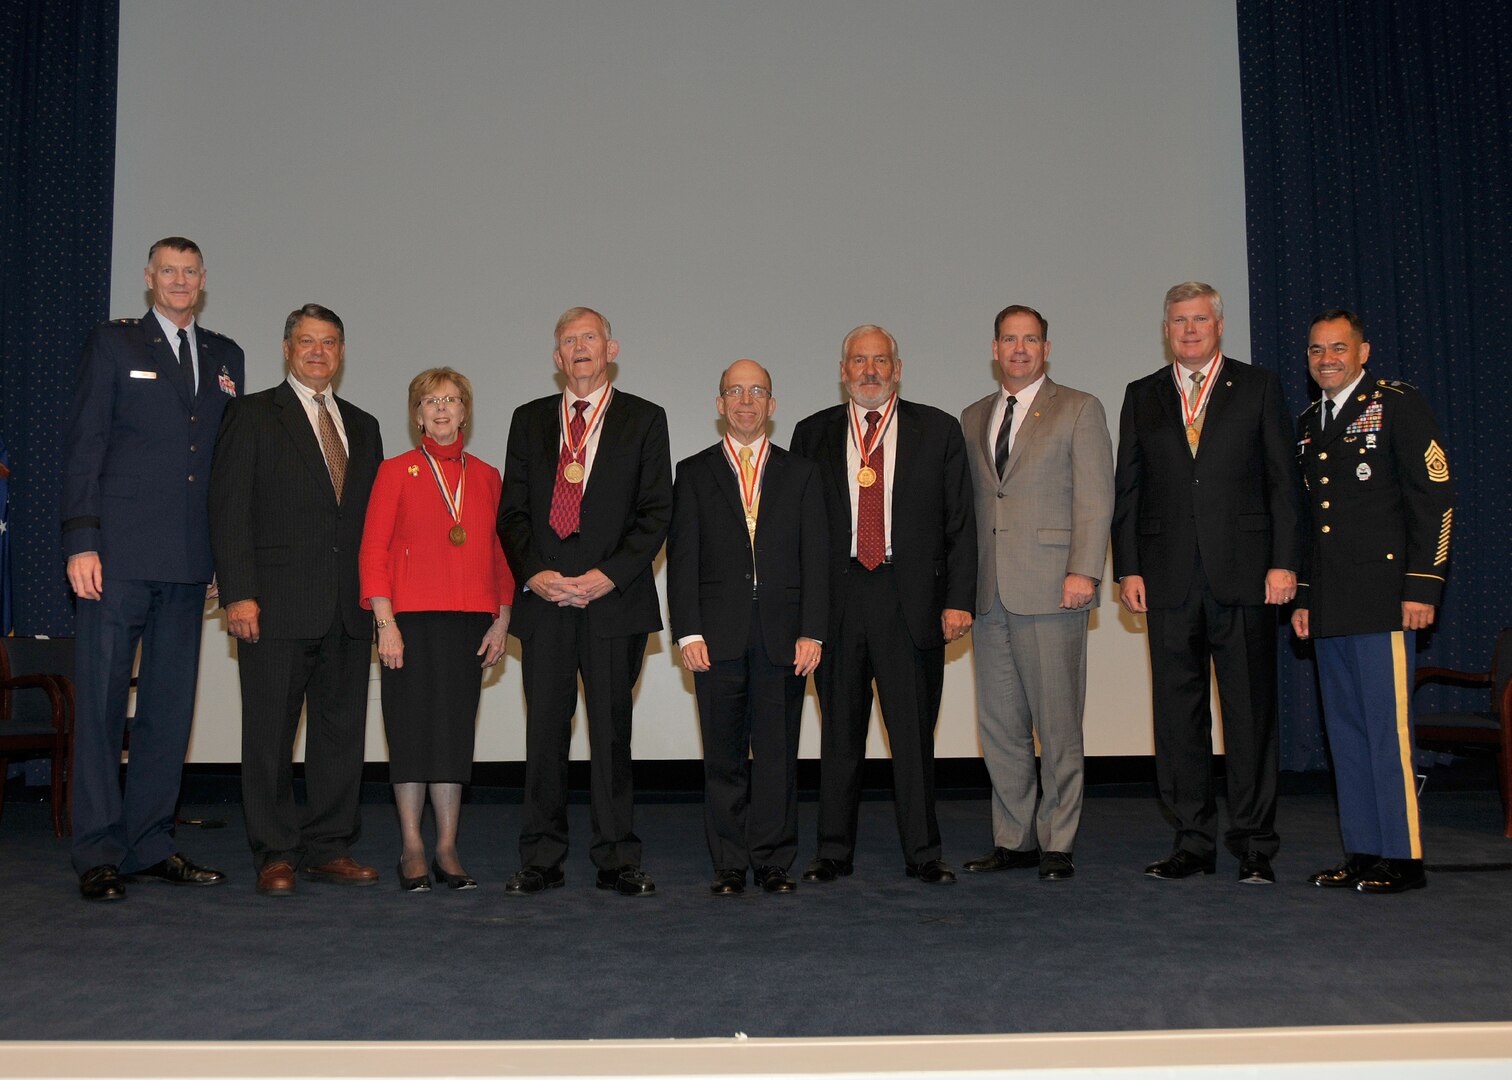 DLA senior leaders and 2015 Hall of Fame honorees at the Sept. 20, 2016, induction ceremony at Fort Belvoir, Virginia. From left: Air Force Lt. Gen. Andy Busch, Albert Kluczynski (on behalf of Paula Kluczynski), Celia Adolphi, David Ennis, Paul Zebrowski, Kent Galbraith, Mike Cannon (on behalf of Krissie Davis), Retired Vice Adm. Al Thompson, and Army Command Sgt. Maj. Charles Tobin.